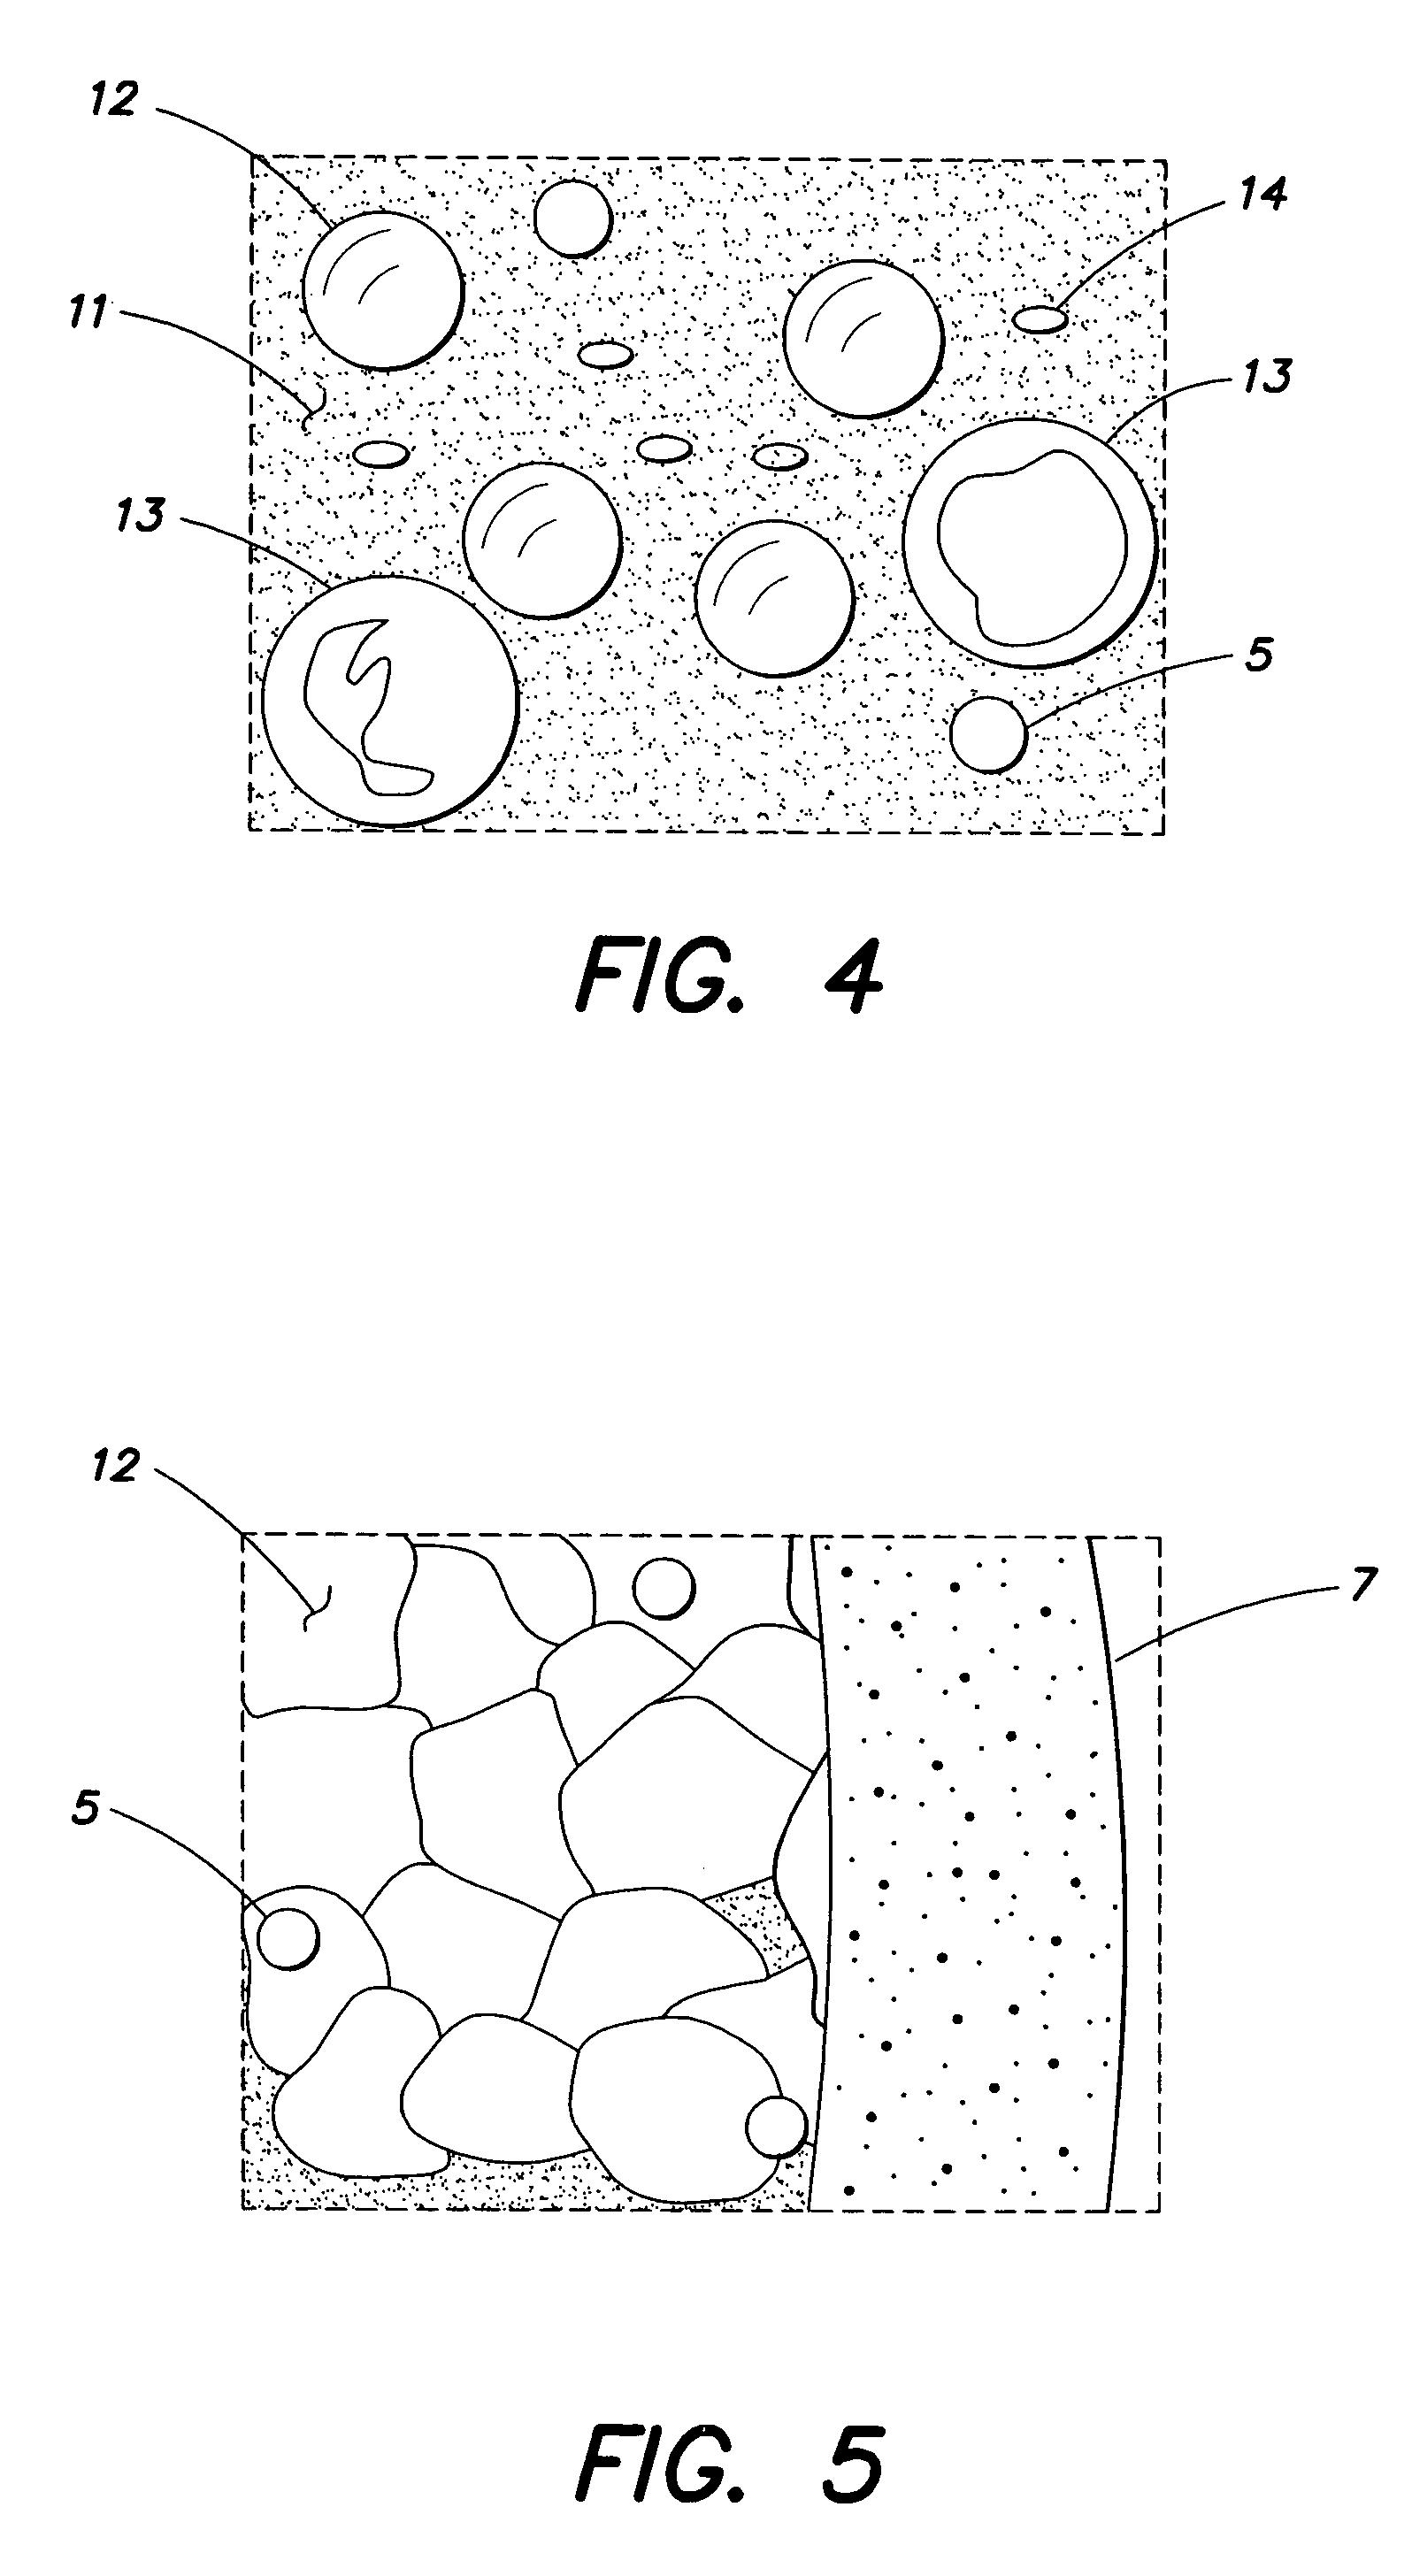 Apparatus and method for performing counts within a biologic fluid sample